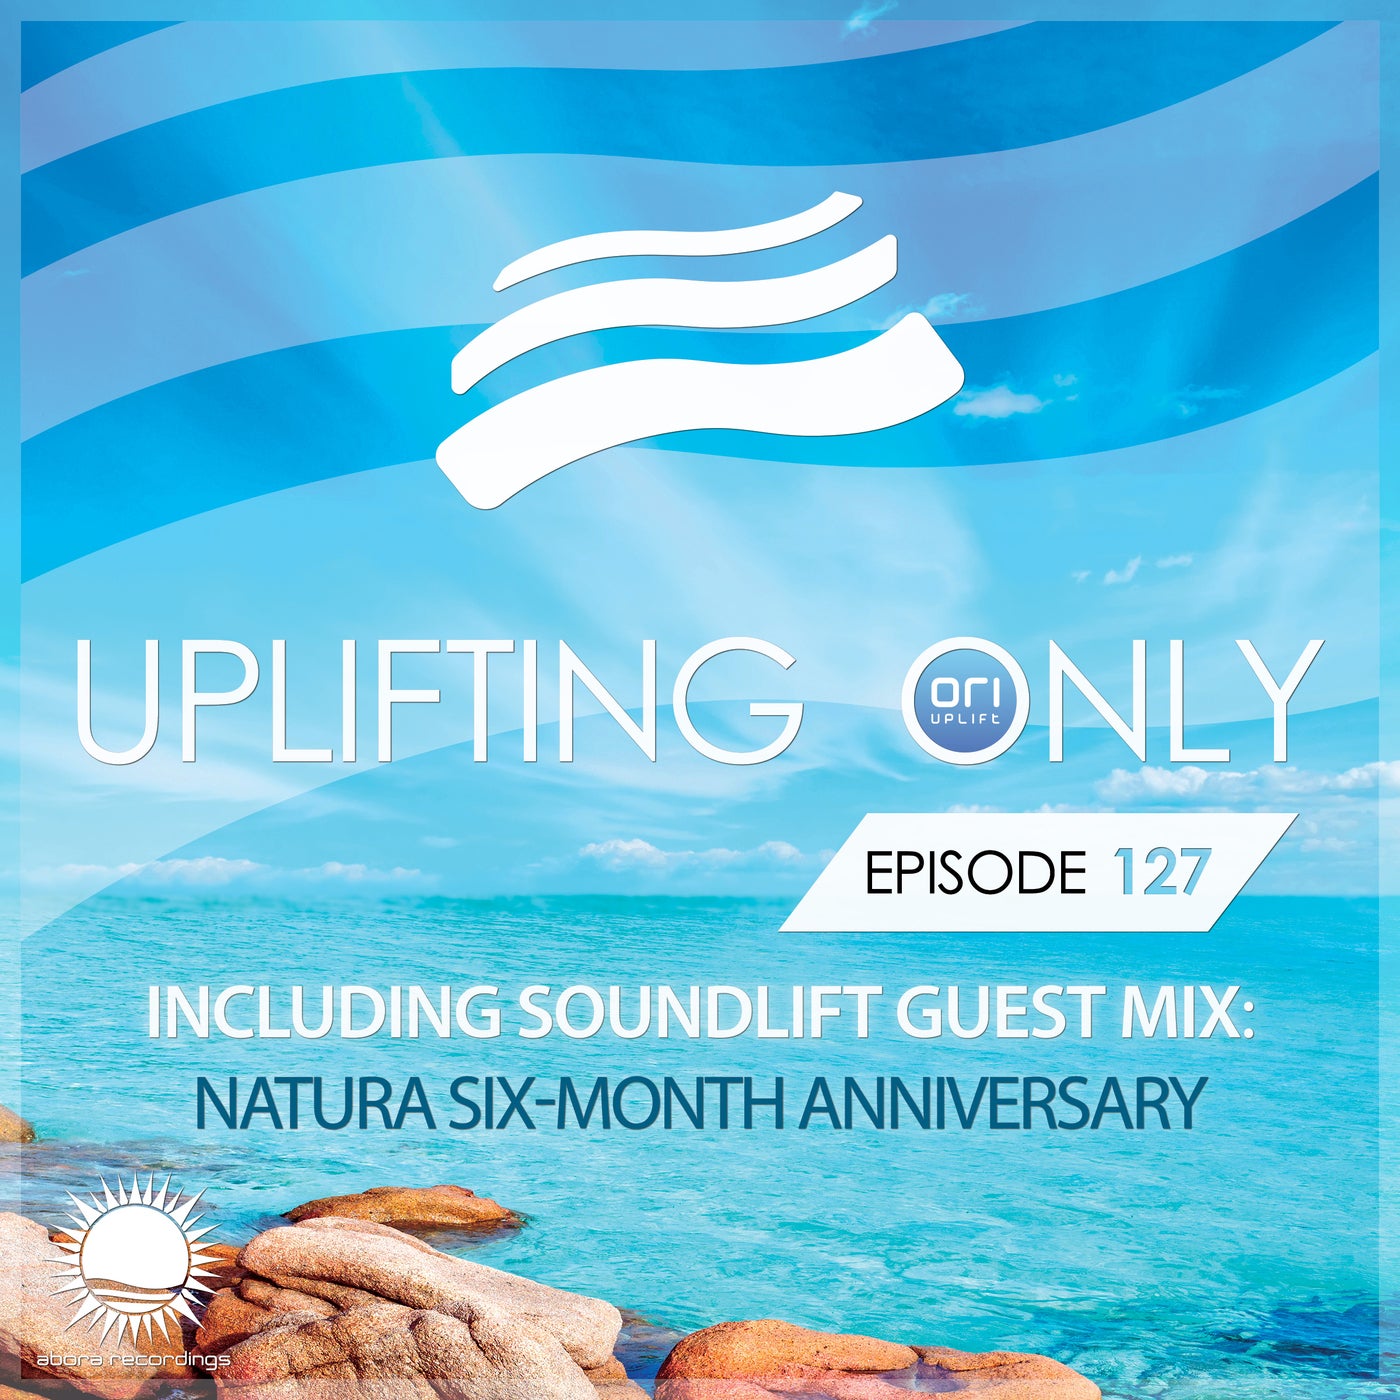 Uplifting Only Episode 127 (incl. SoundLift Guest Mix) [All Instrumental]